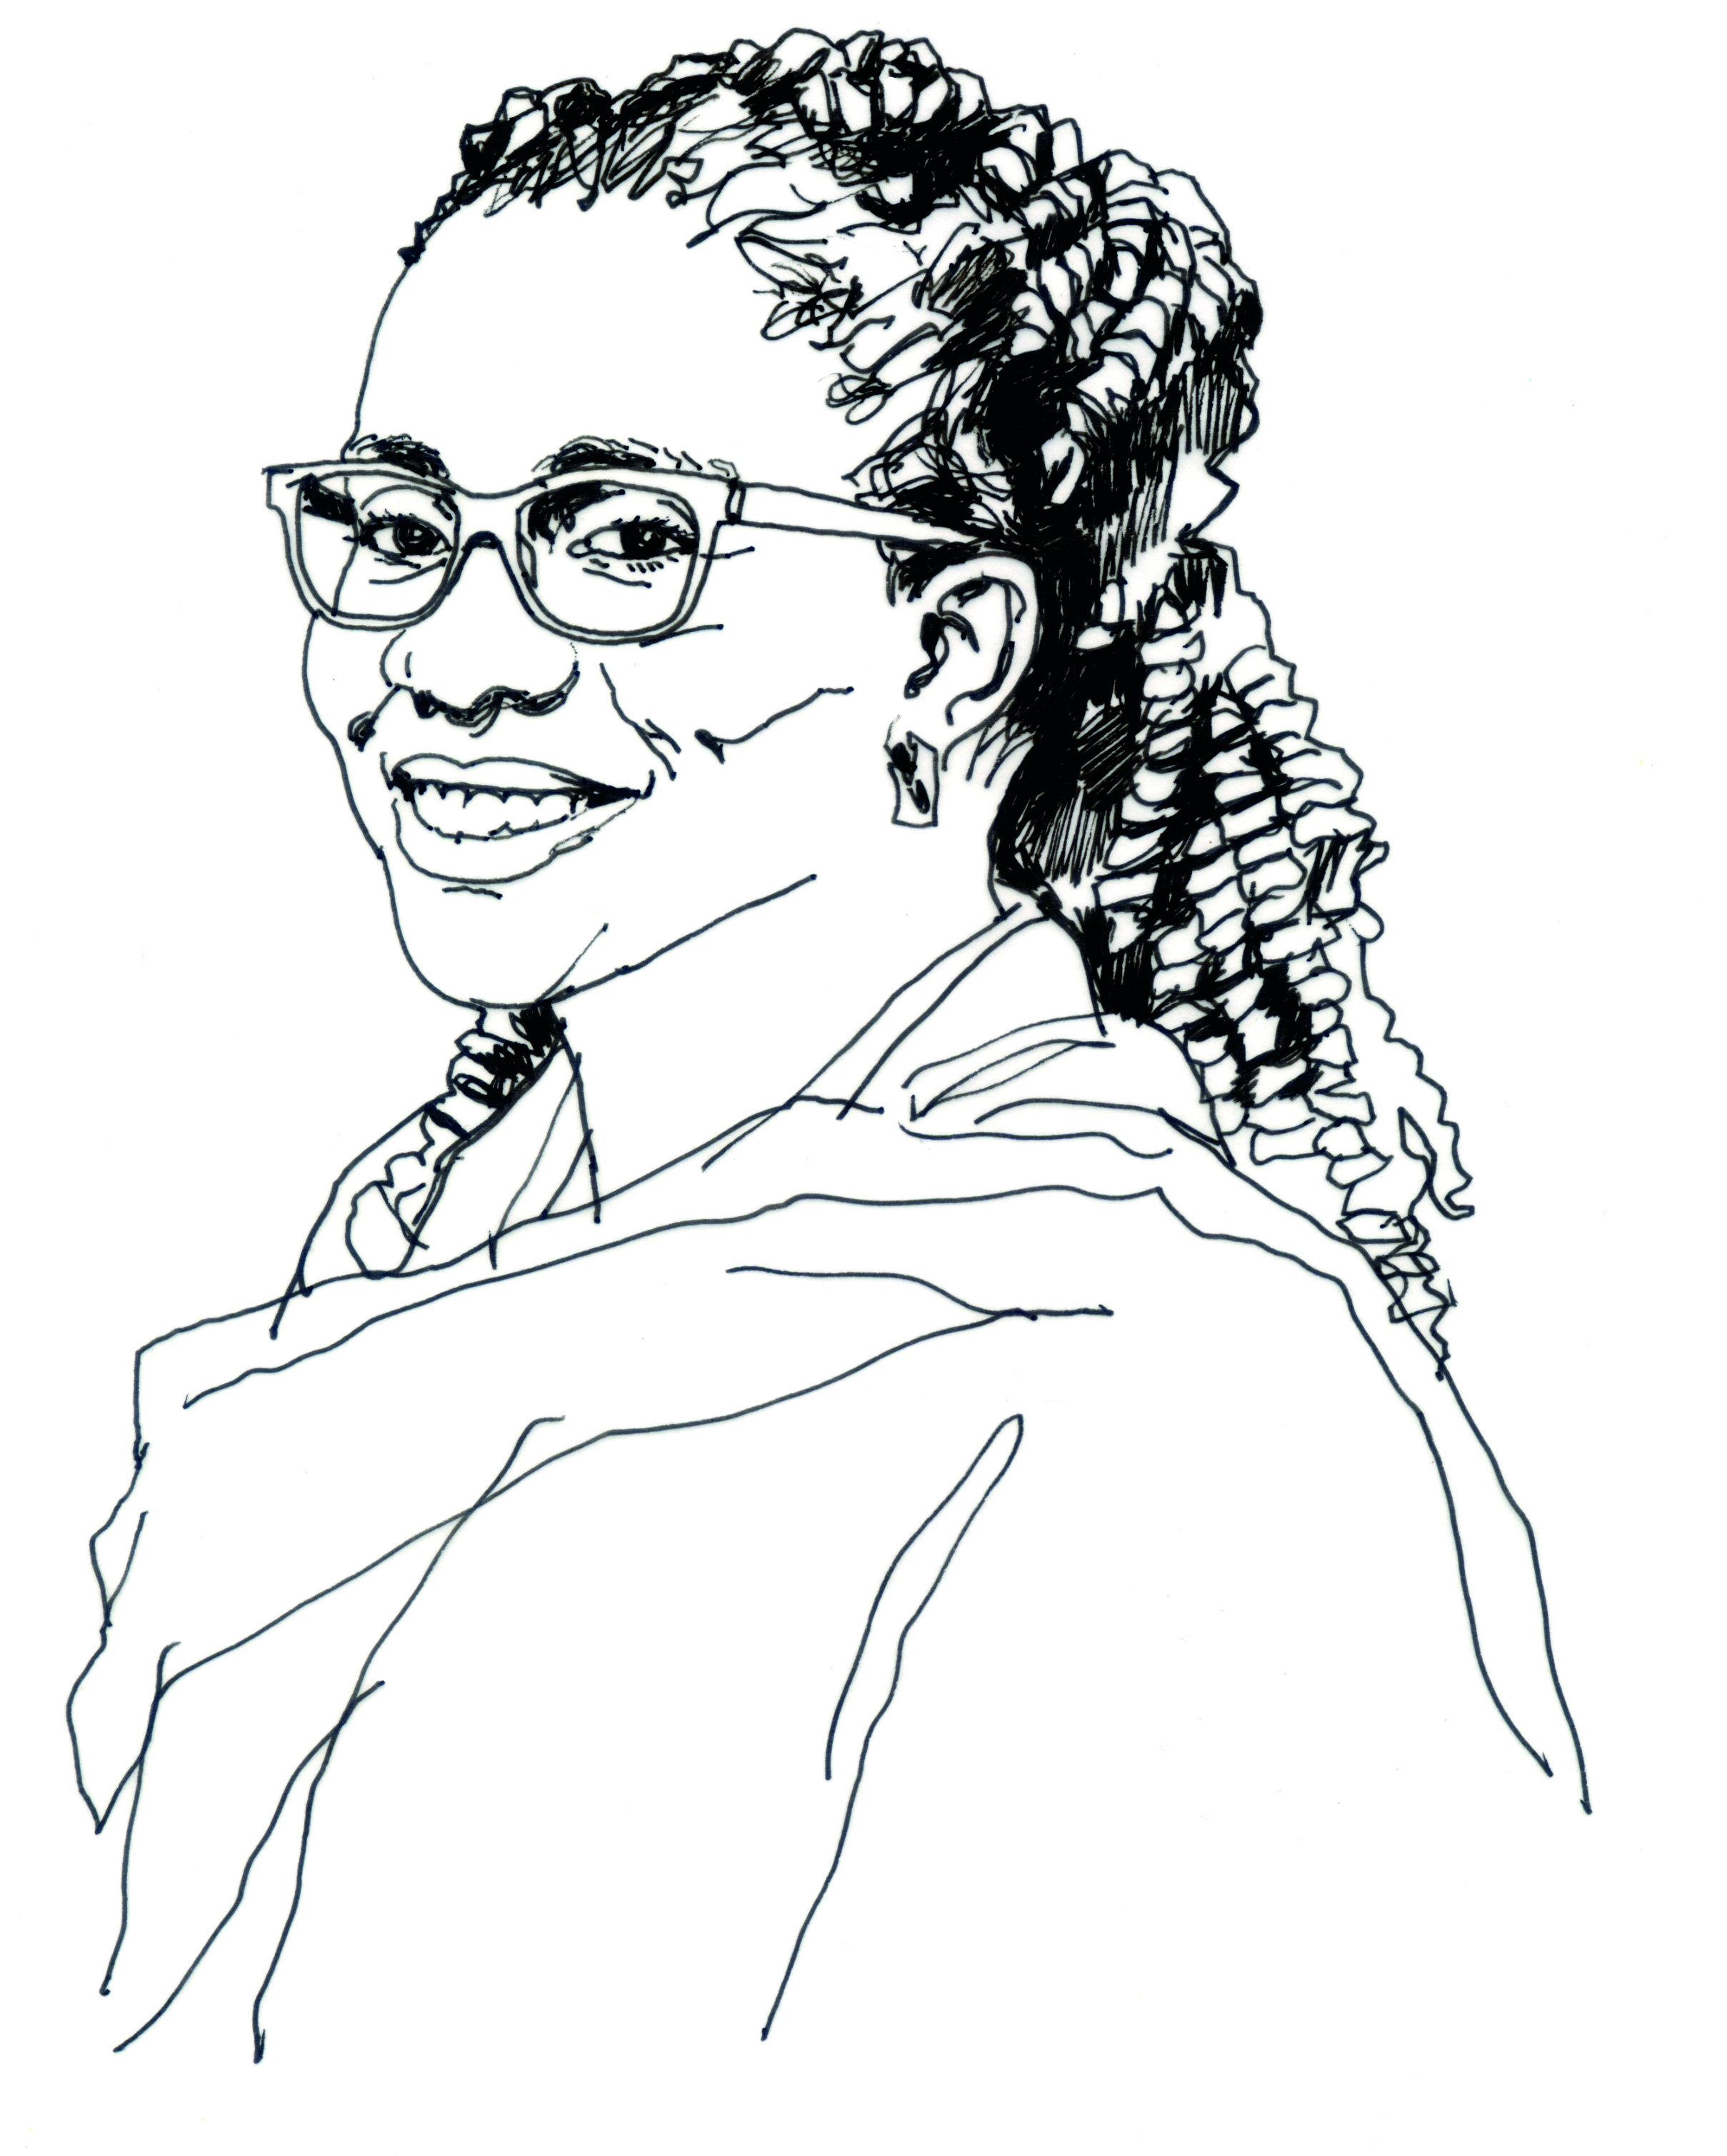 Illustration in black ink of smiling, middle-aged Black woman in glasses and long hair tied back in cornrows.